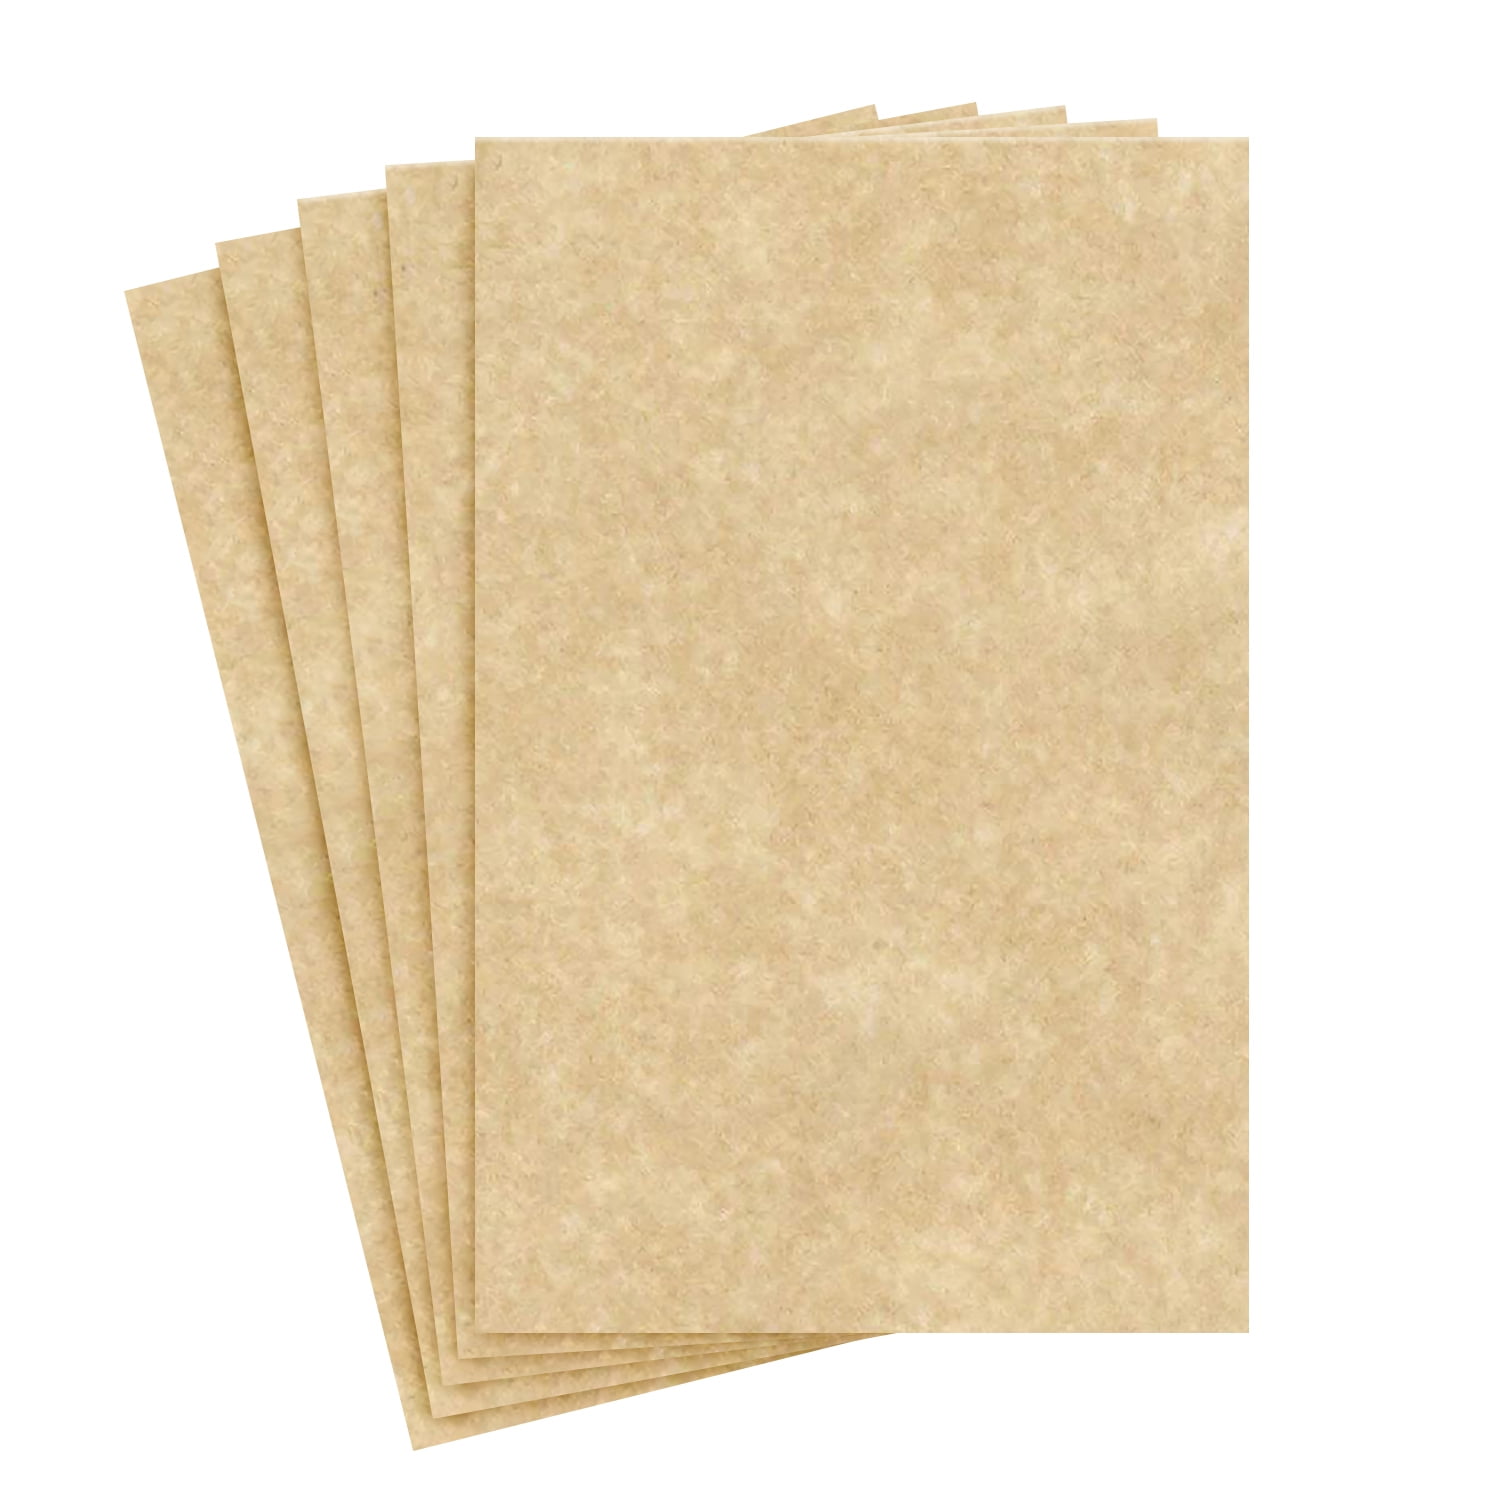 100 Old Age Parchment Paper for Writing - 60 Text ( 24 Bond